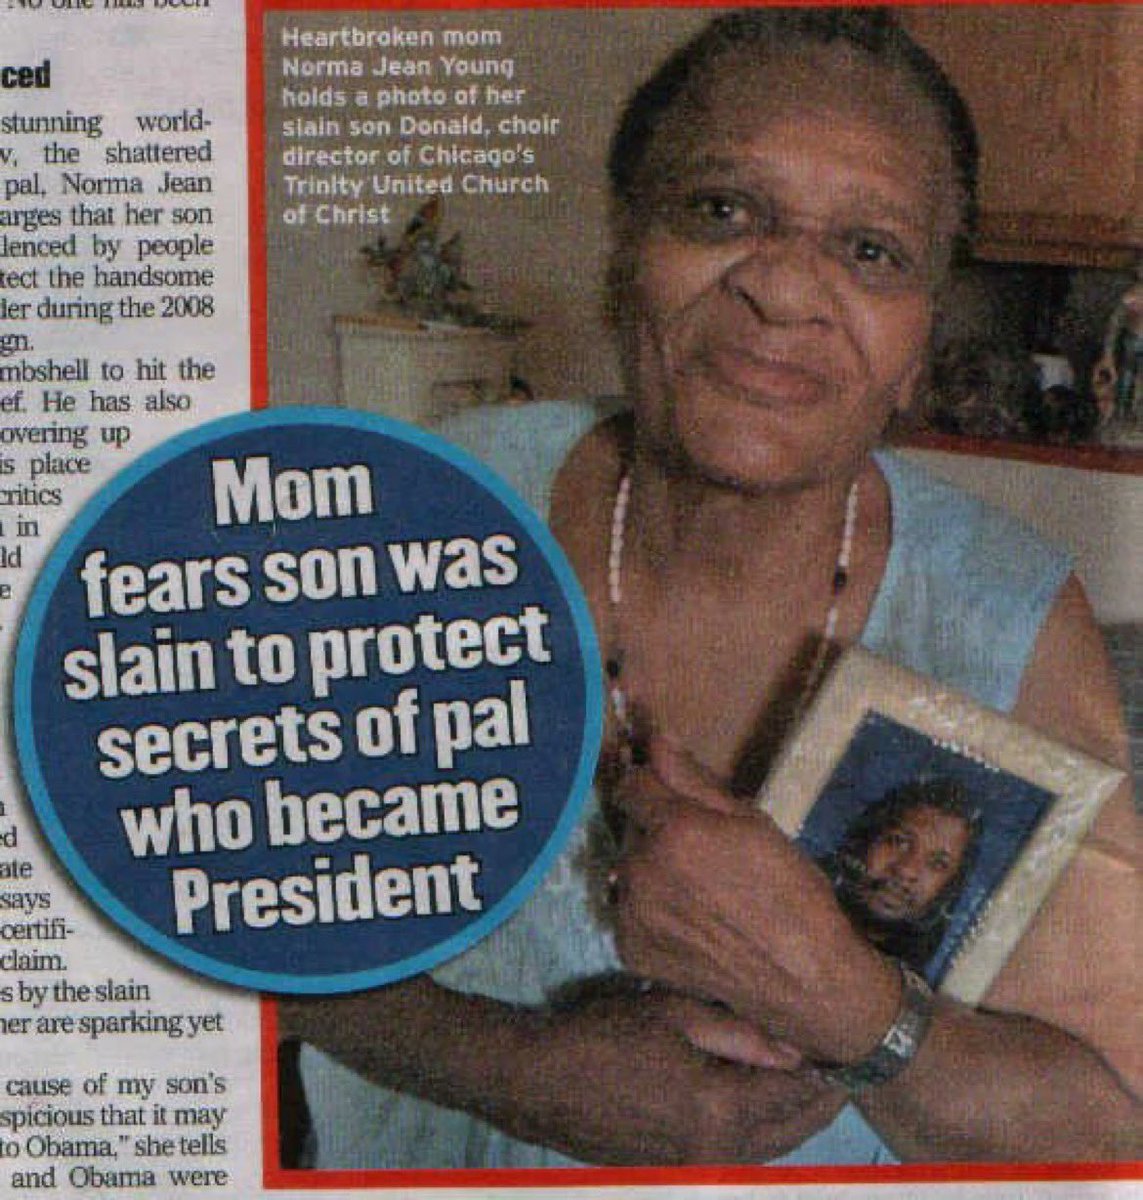 On July 19, 2010, Norma Jean Young, Donald Young's mother, who is in her eighties, spoke out about her thoughts that her gay son was killed by President Obama to preserve Obama's image and ensure his political future as President.